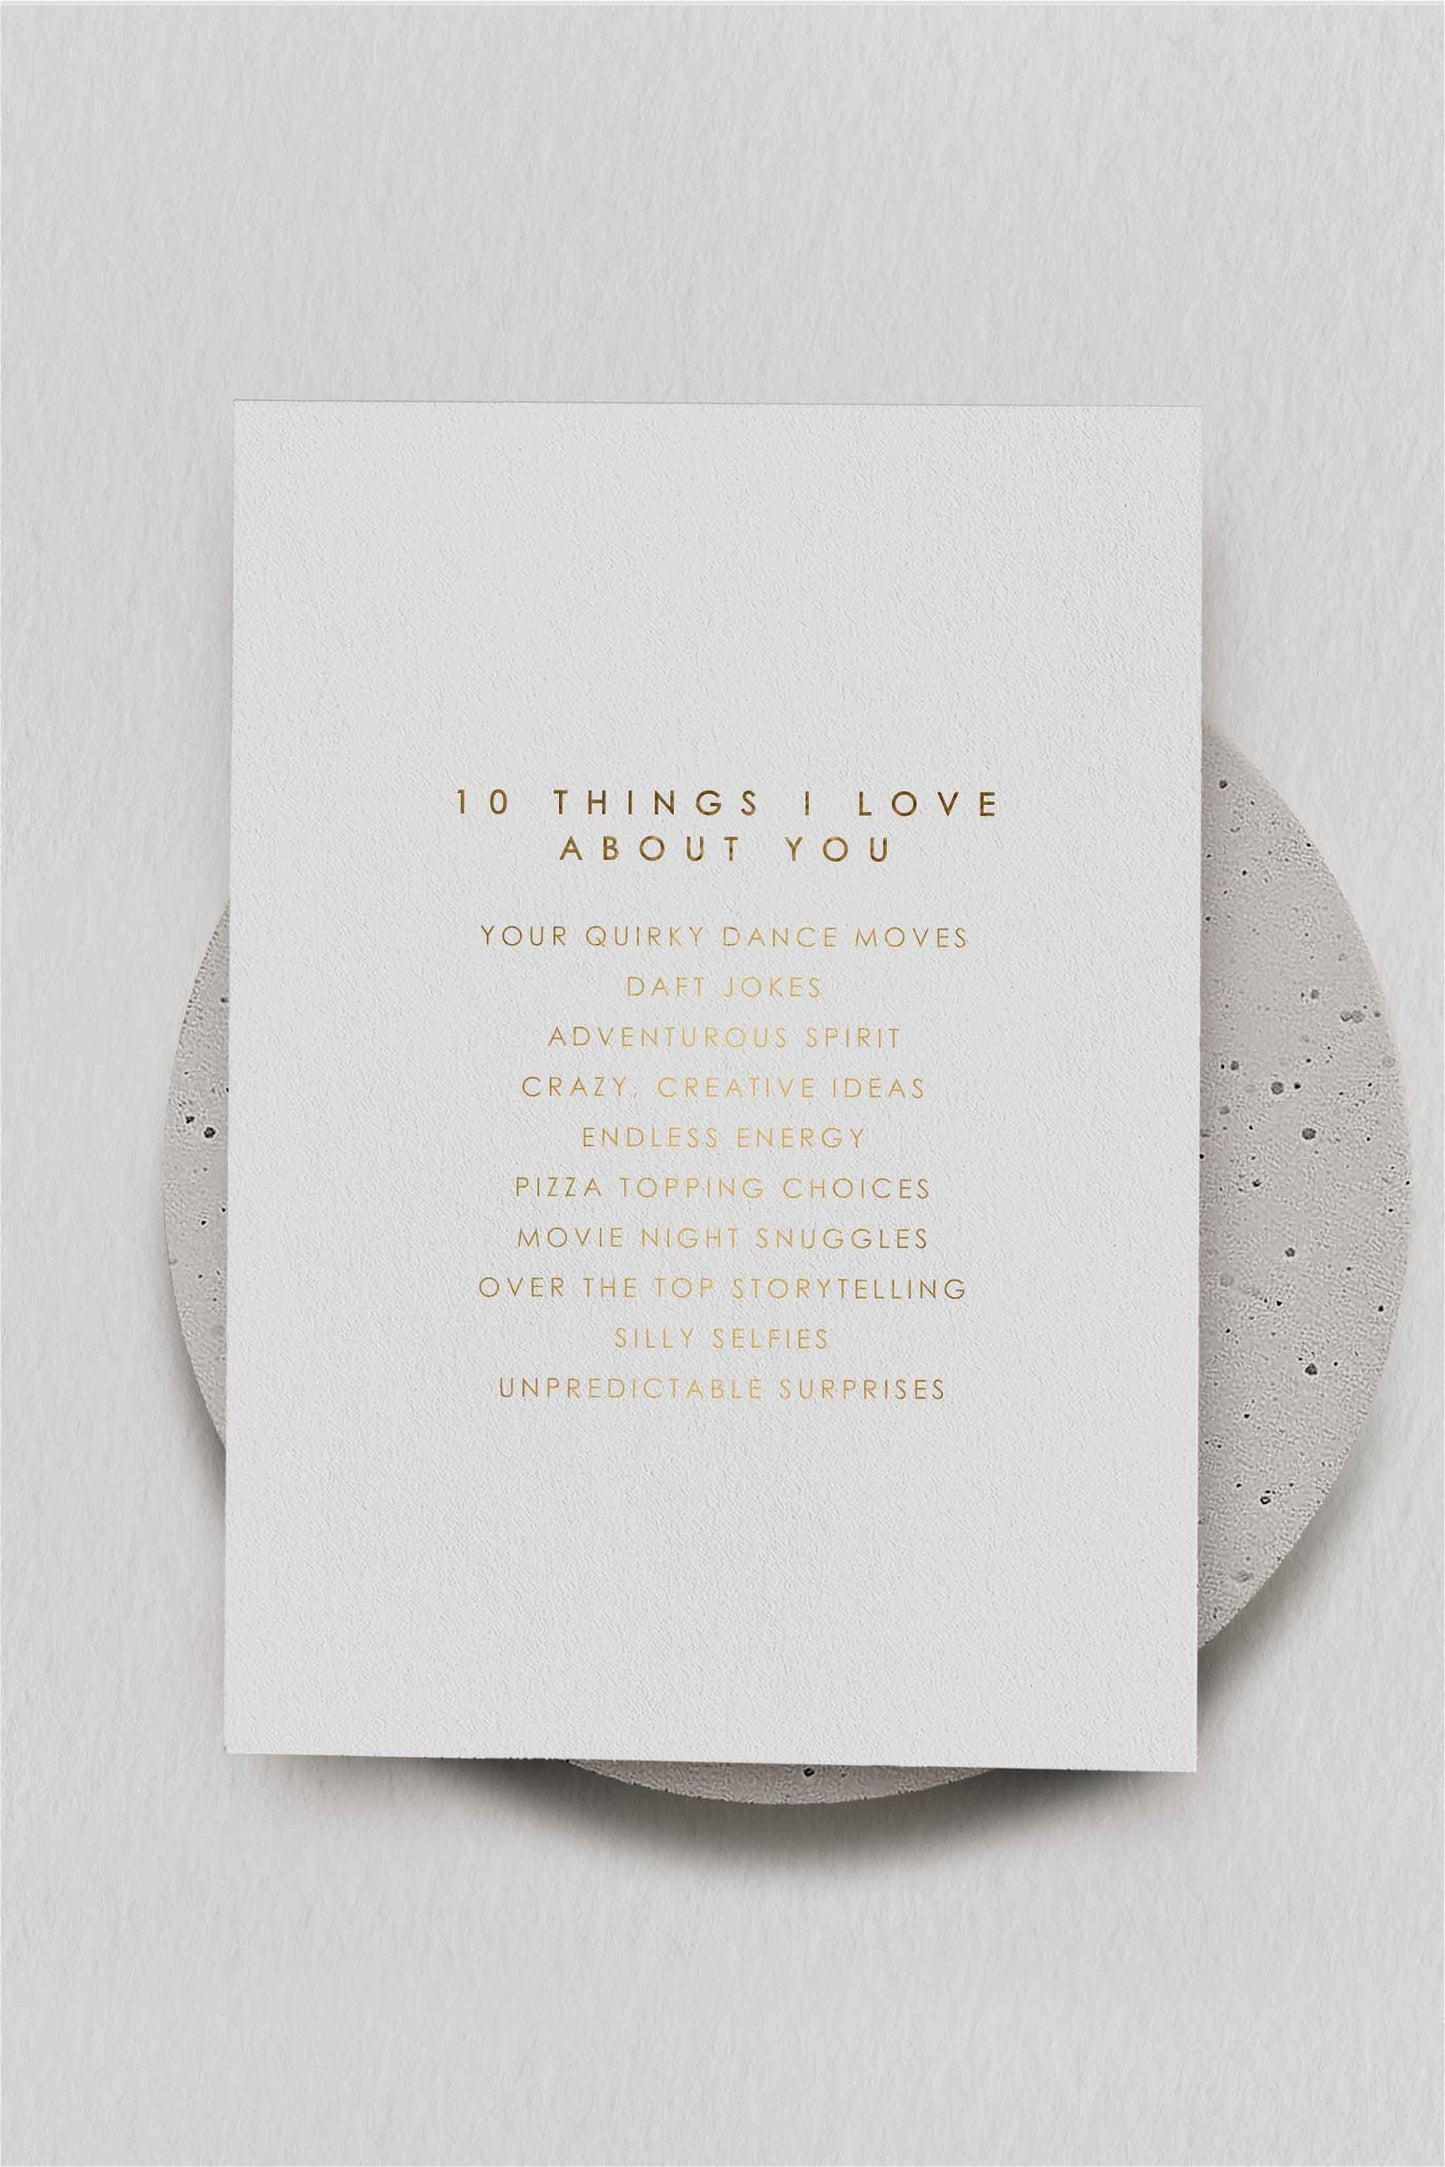 10 Things I Love Valentine's Card  Ivy and Gold Wedding Stationery   